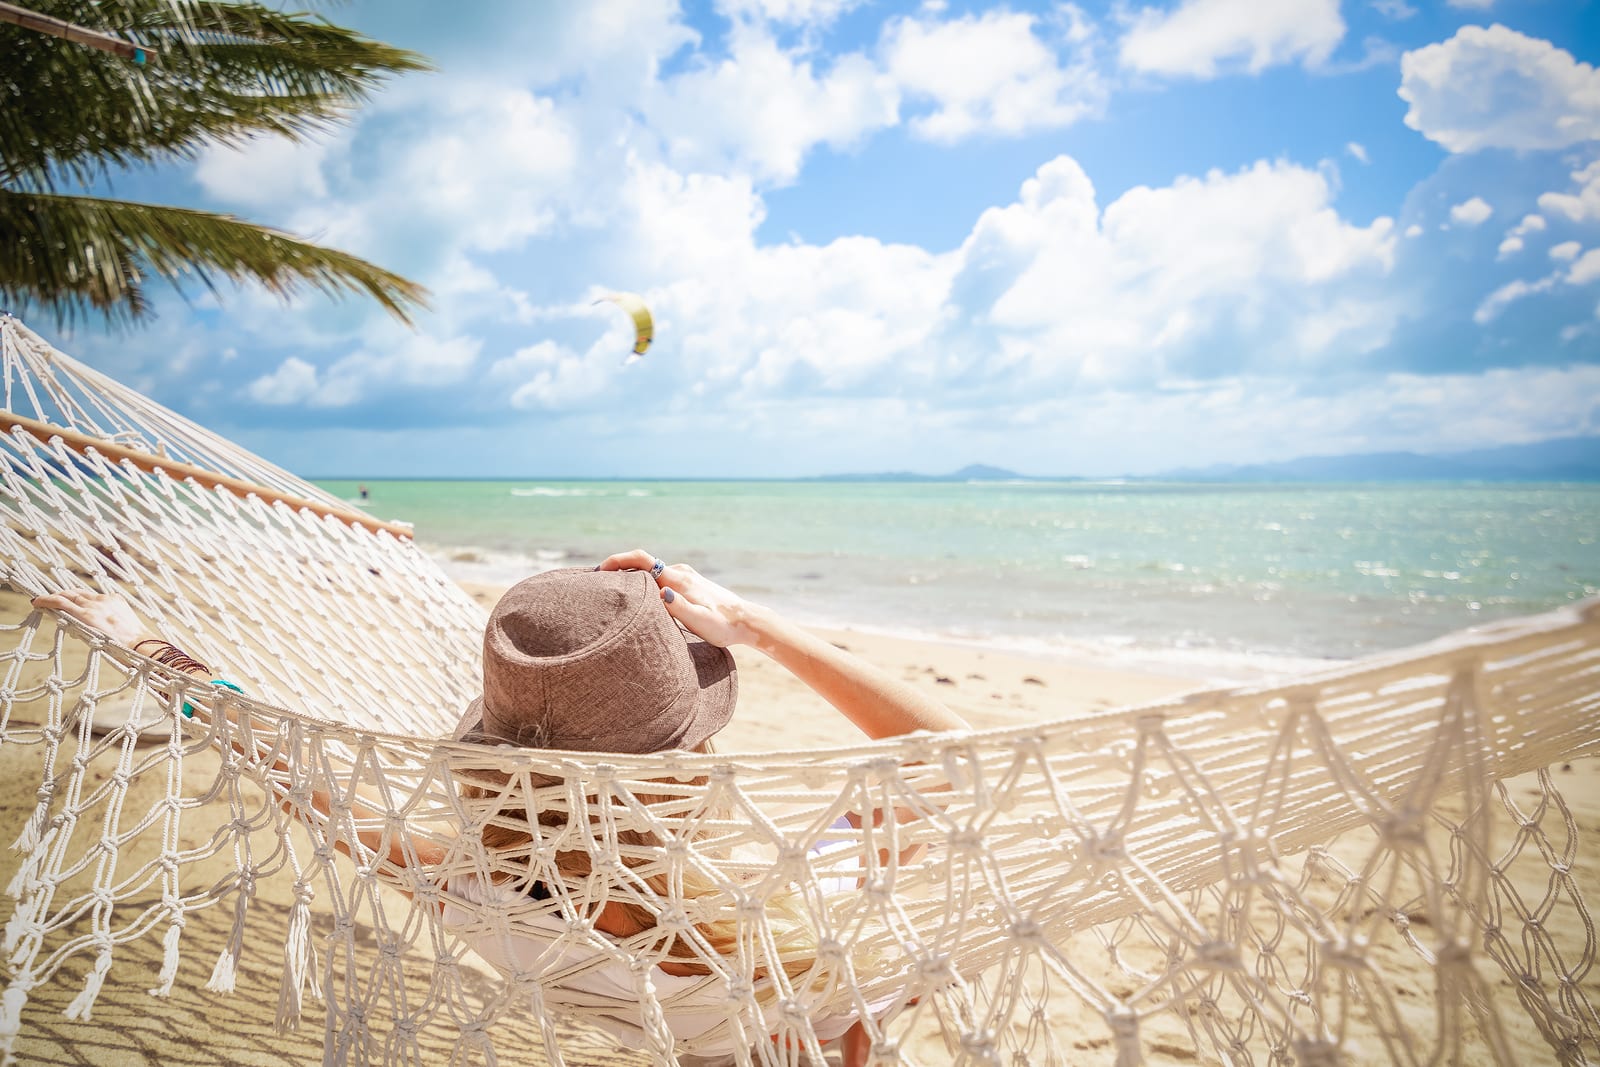 Vacations Lead to Valuable Business | Business Transition Planning | Anders CPA